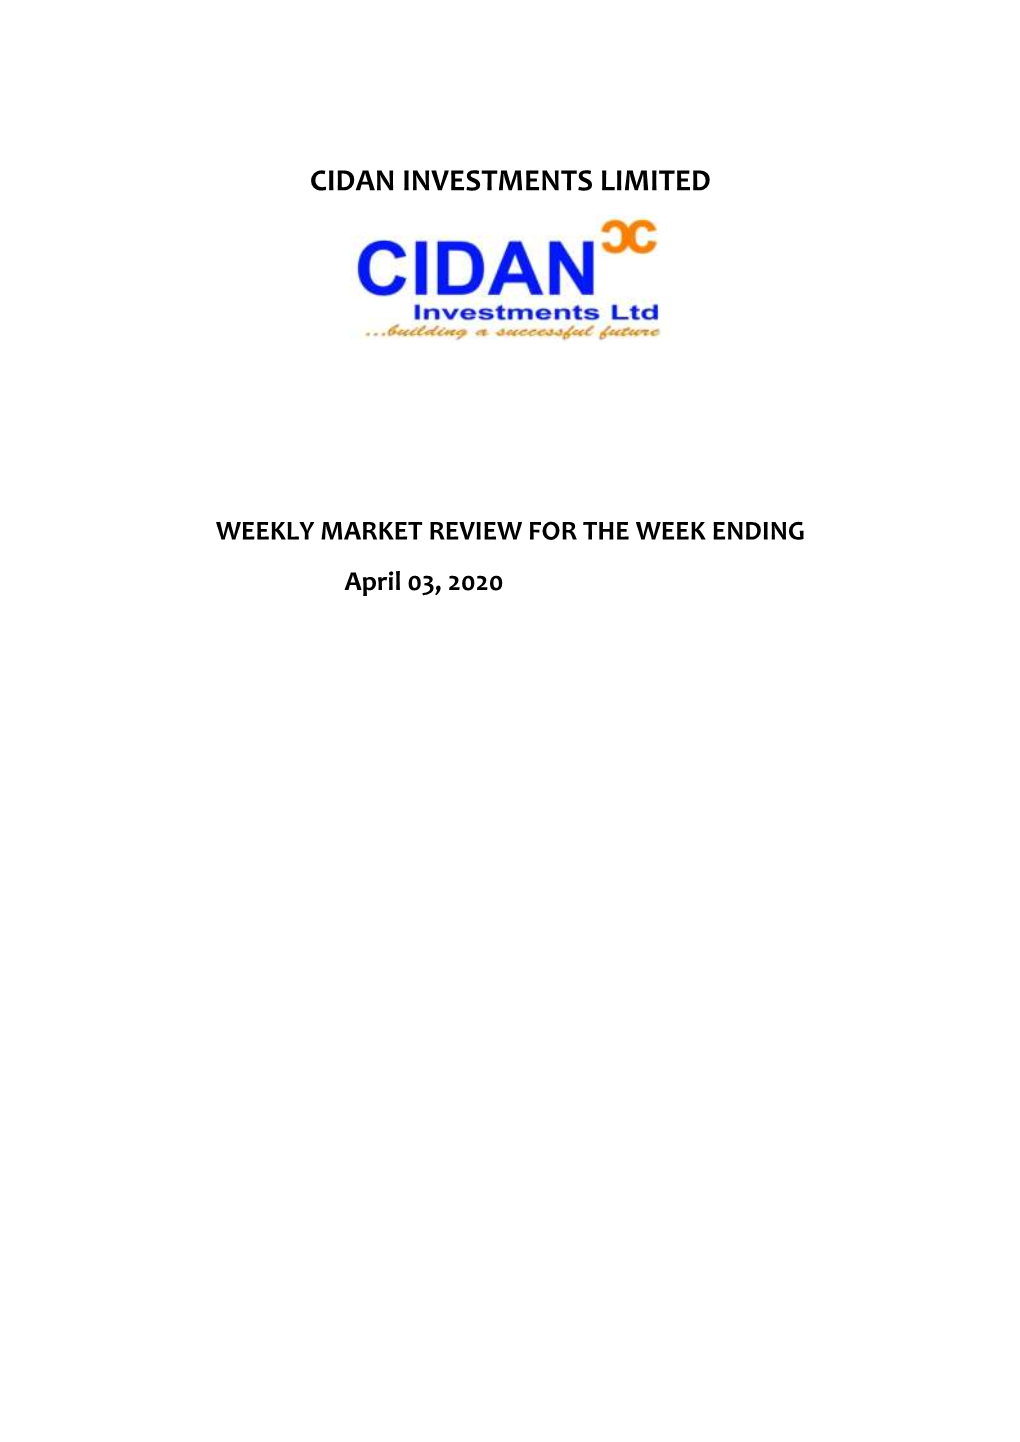 Cidan Investments Limited